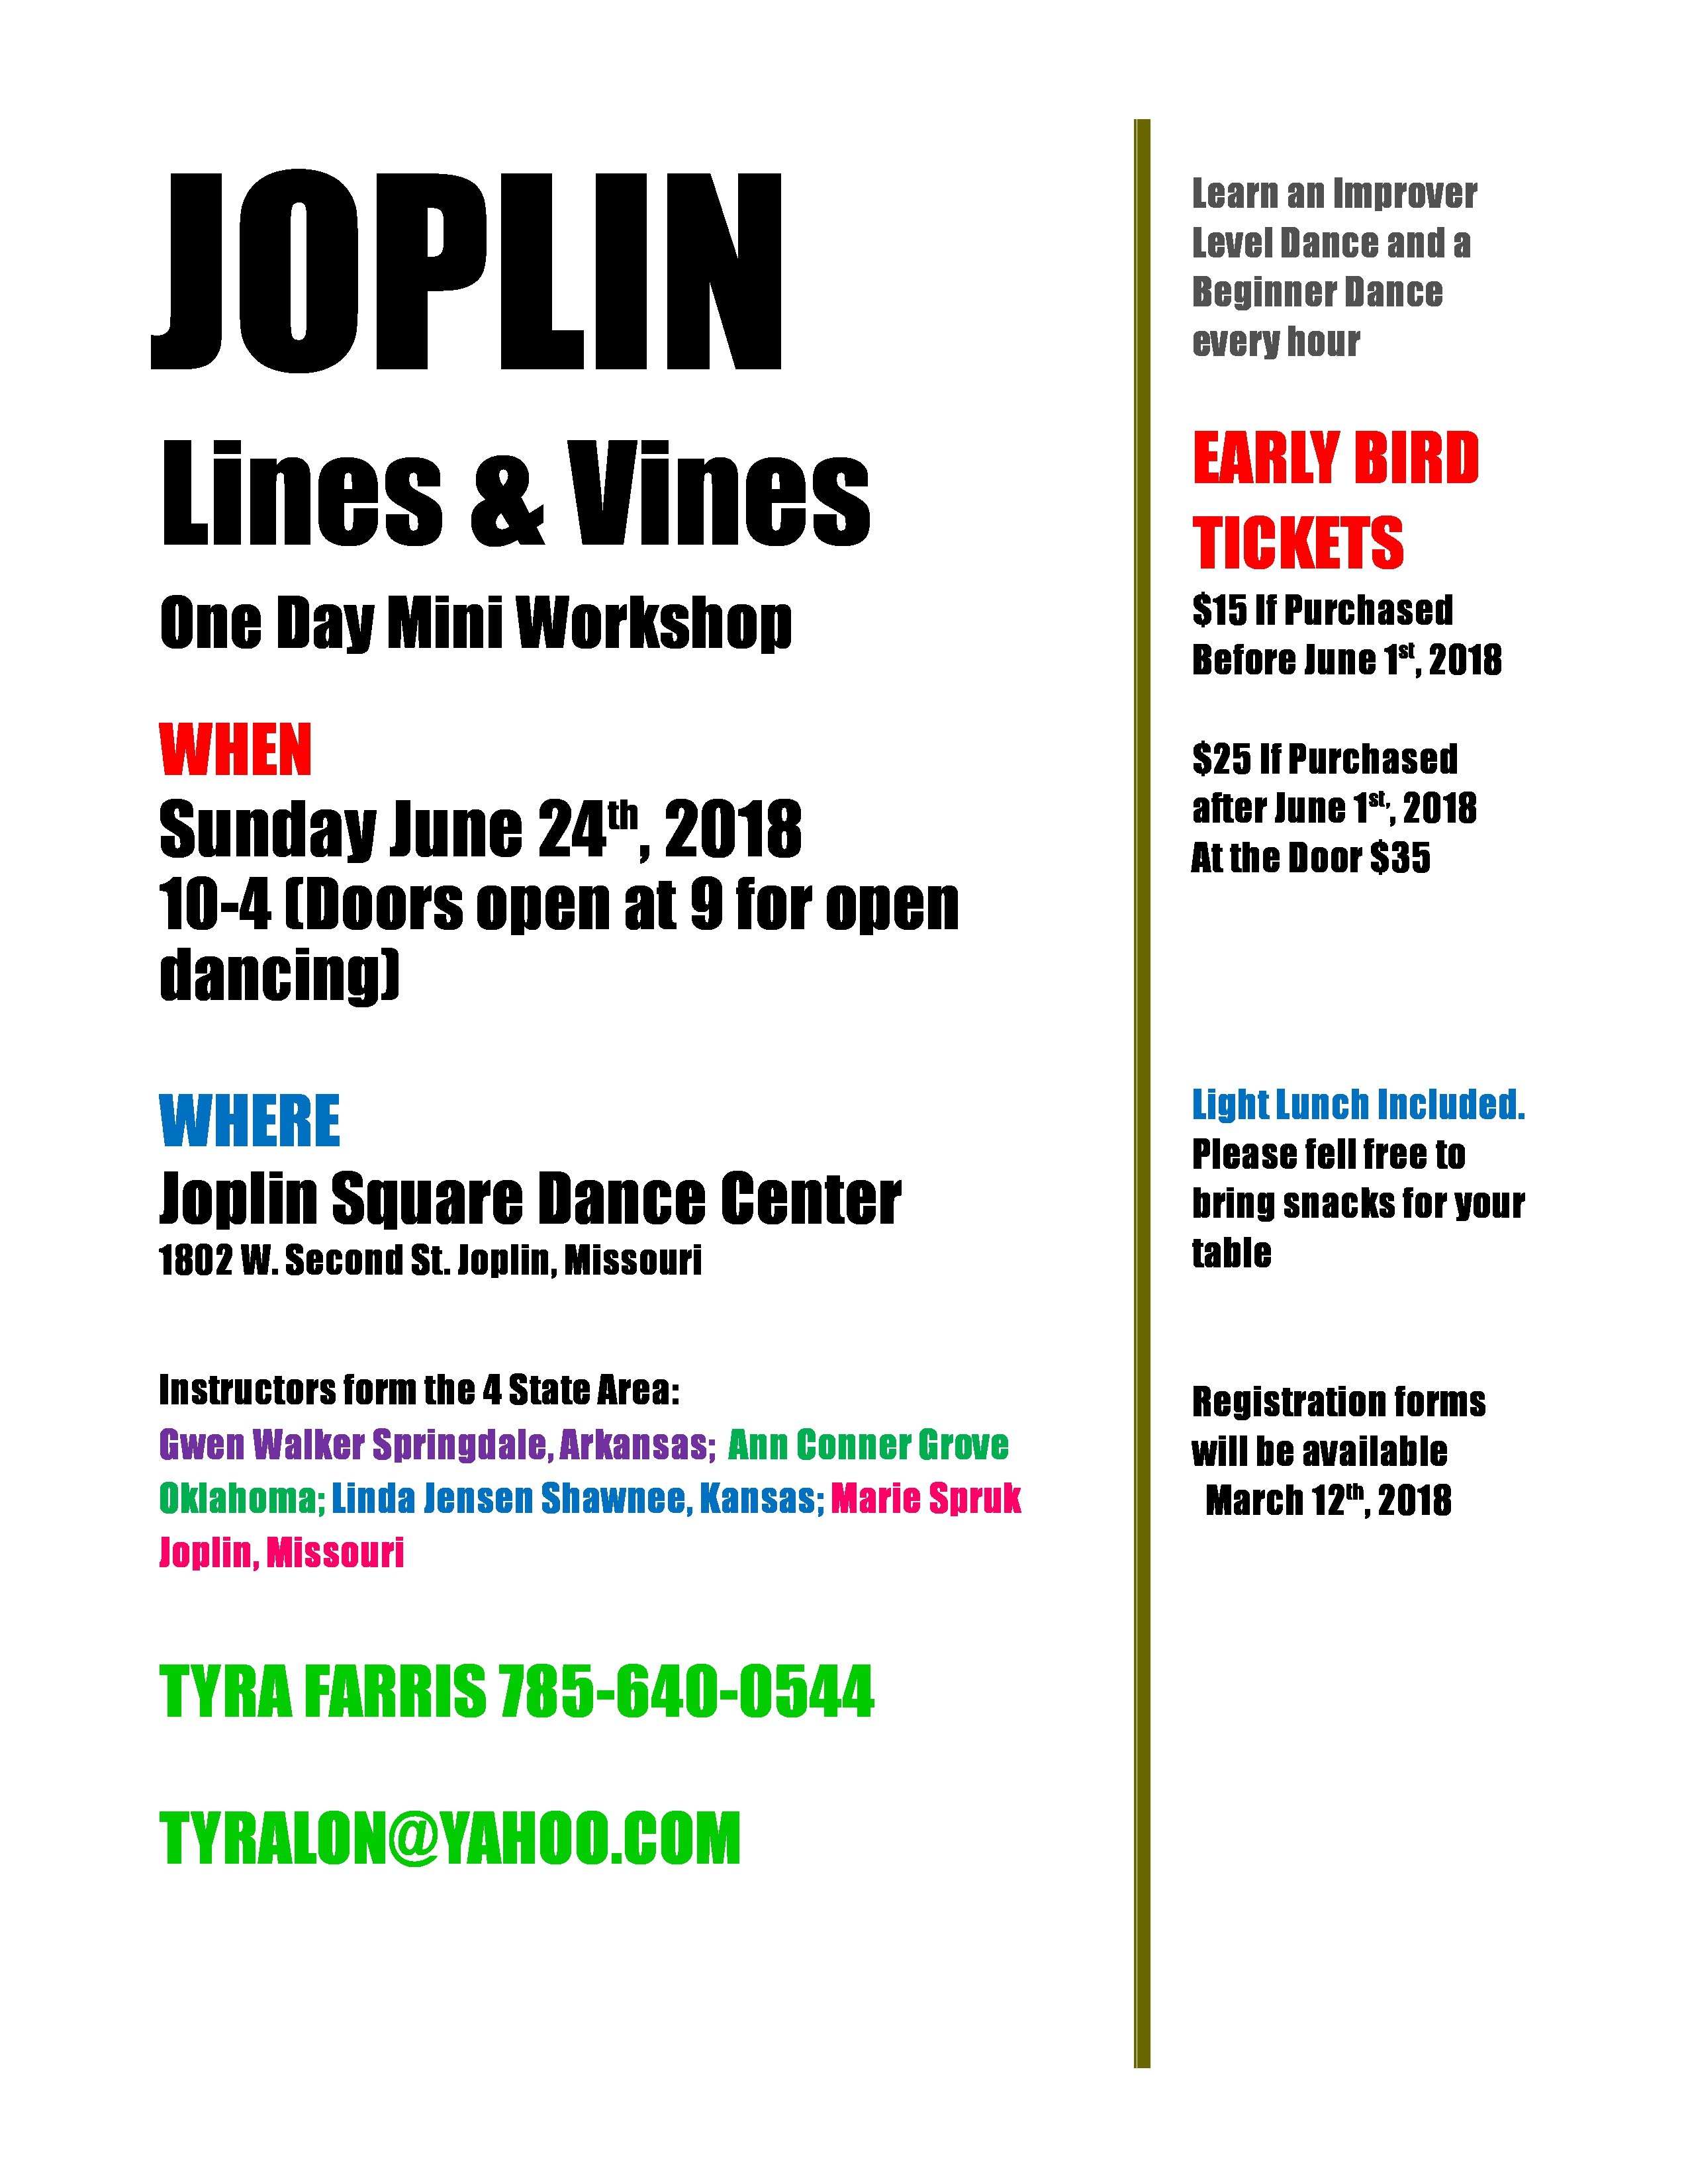 JOPLIN 
Lines a Vines 
One Day Mini Workshop 
WHEN 
Sunday June 24th 2018 
10-4 (Doors open at 9 for open 
dancing) 
WHERE 
Joplin Square Dance Center 
1802 W. Second St. loolin, Missouri 
Instructors form the 4 State Area: 
Gwen Walker Springdale, Arkansas; Ann Conner Grove 
Oklahoma; Linda Jensen Shawnee, Kansas; Marie Soruk 
loolin, Missouri 
TYRA FARRIS 185-640-0544 
TYRALON@YAHOO.COM 
Learn an Improver 
Level Dance and a 
Beginner Dance 
every hour 
TICKETS 
$15 If Purchased 
Before lune IR, 2018 
$25 Purchased 
after lune IS', 2018 
At $35 
light lunch Included. 
Please tell tree to 
bring snacks for your 
table 
Registration forms 
will be available 
March 12th 2018 